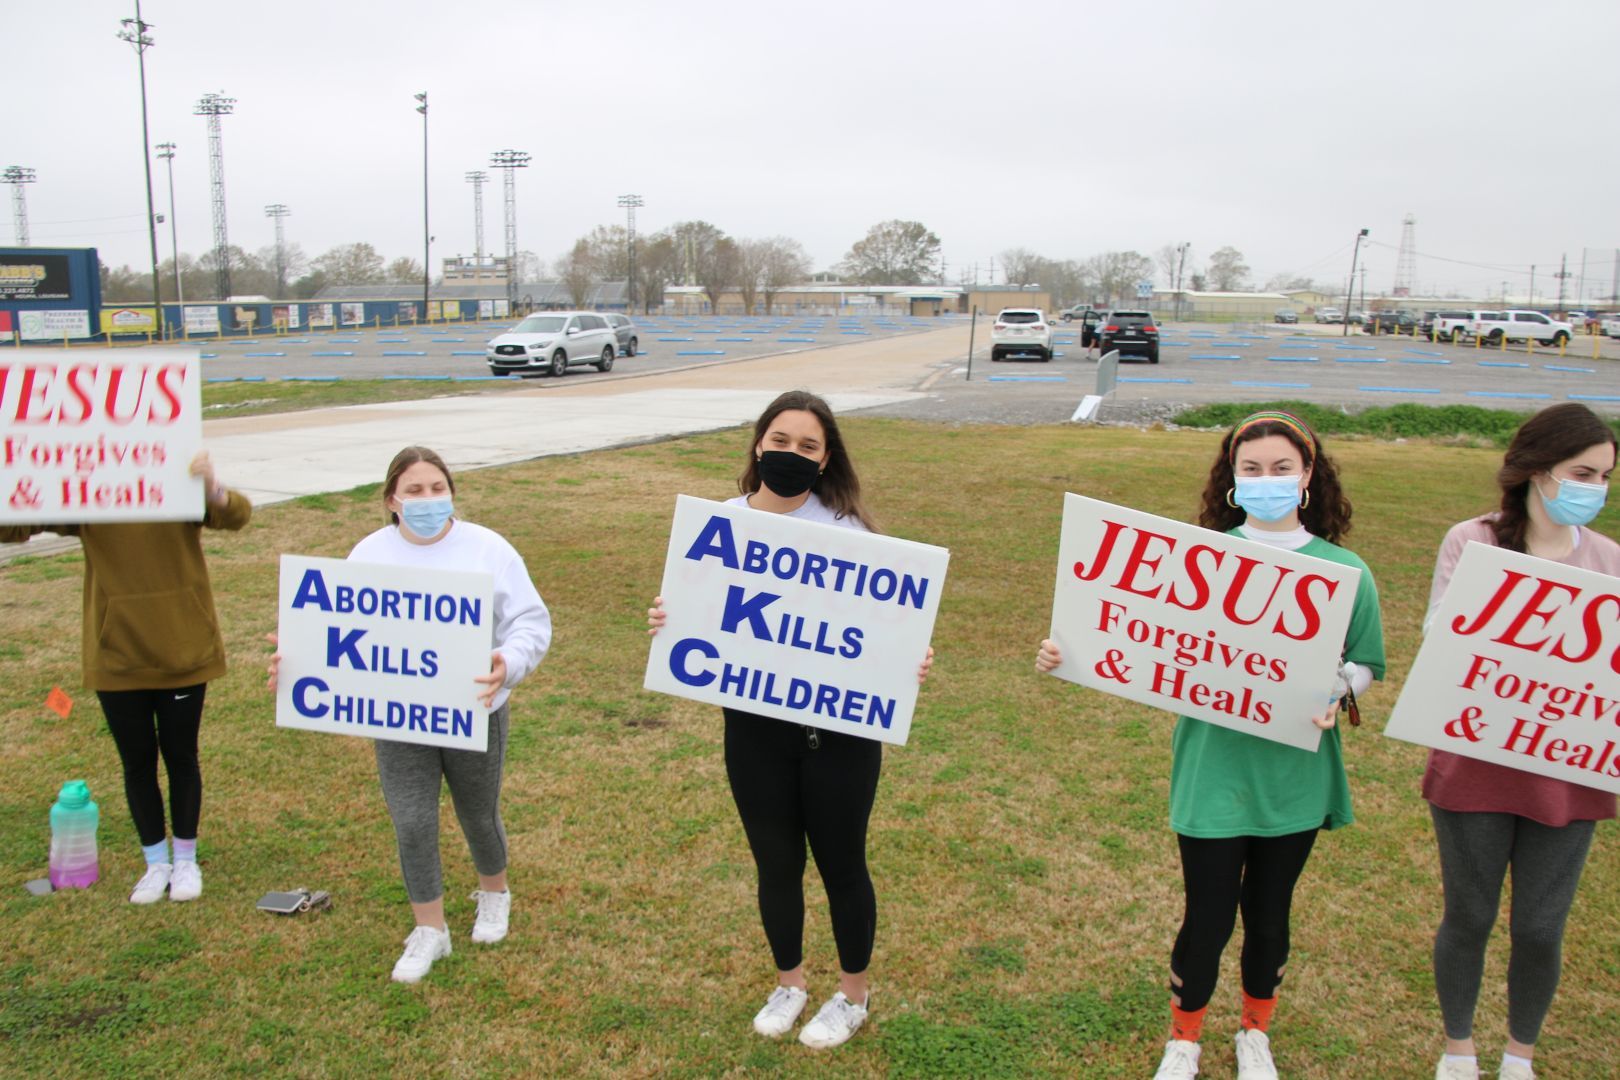 A group of women are holding signs that say abortion kills children and jesus forgives and heals.